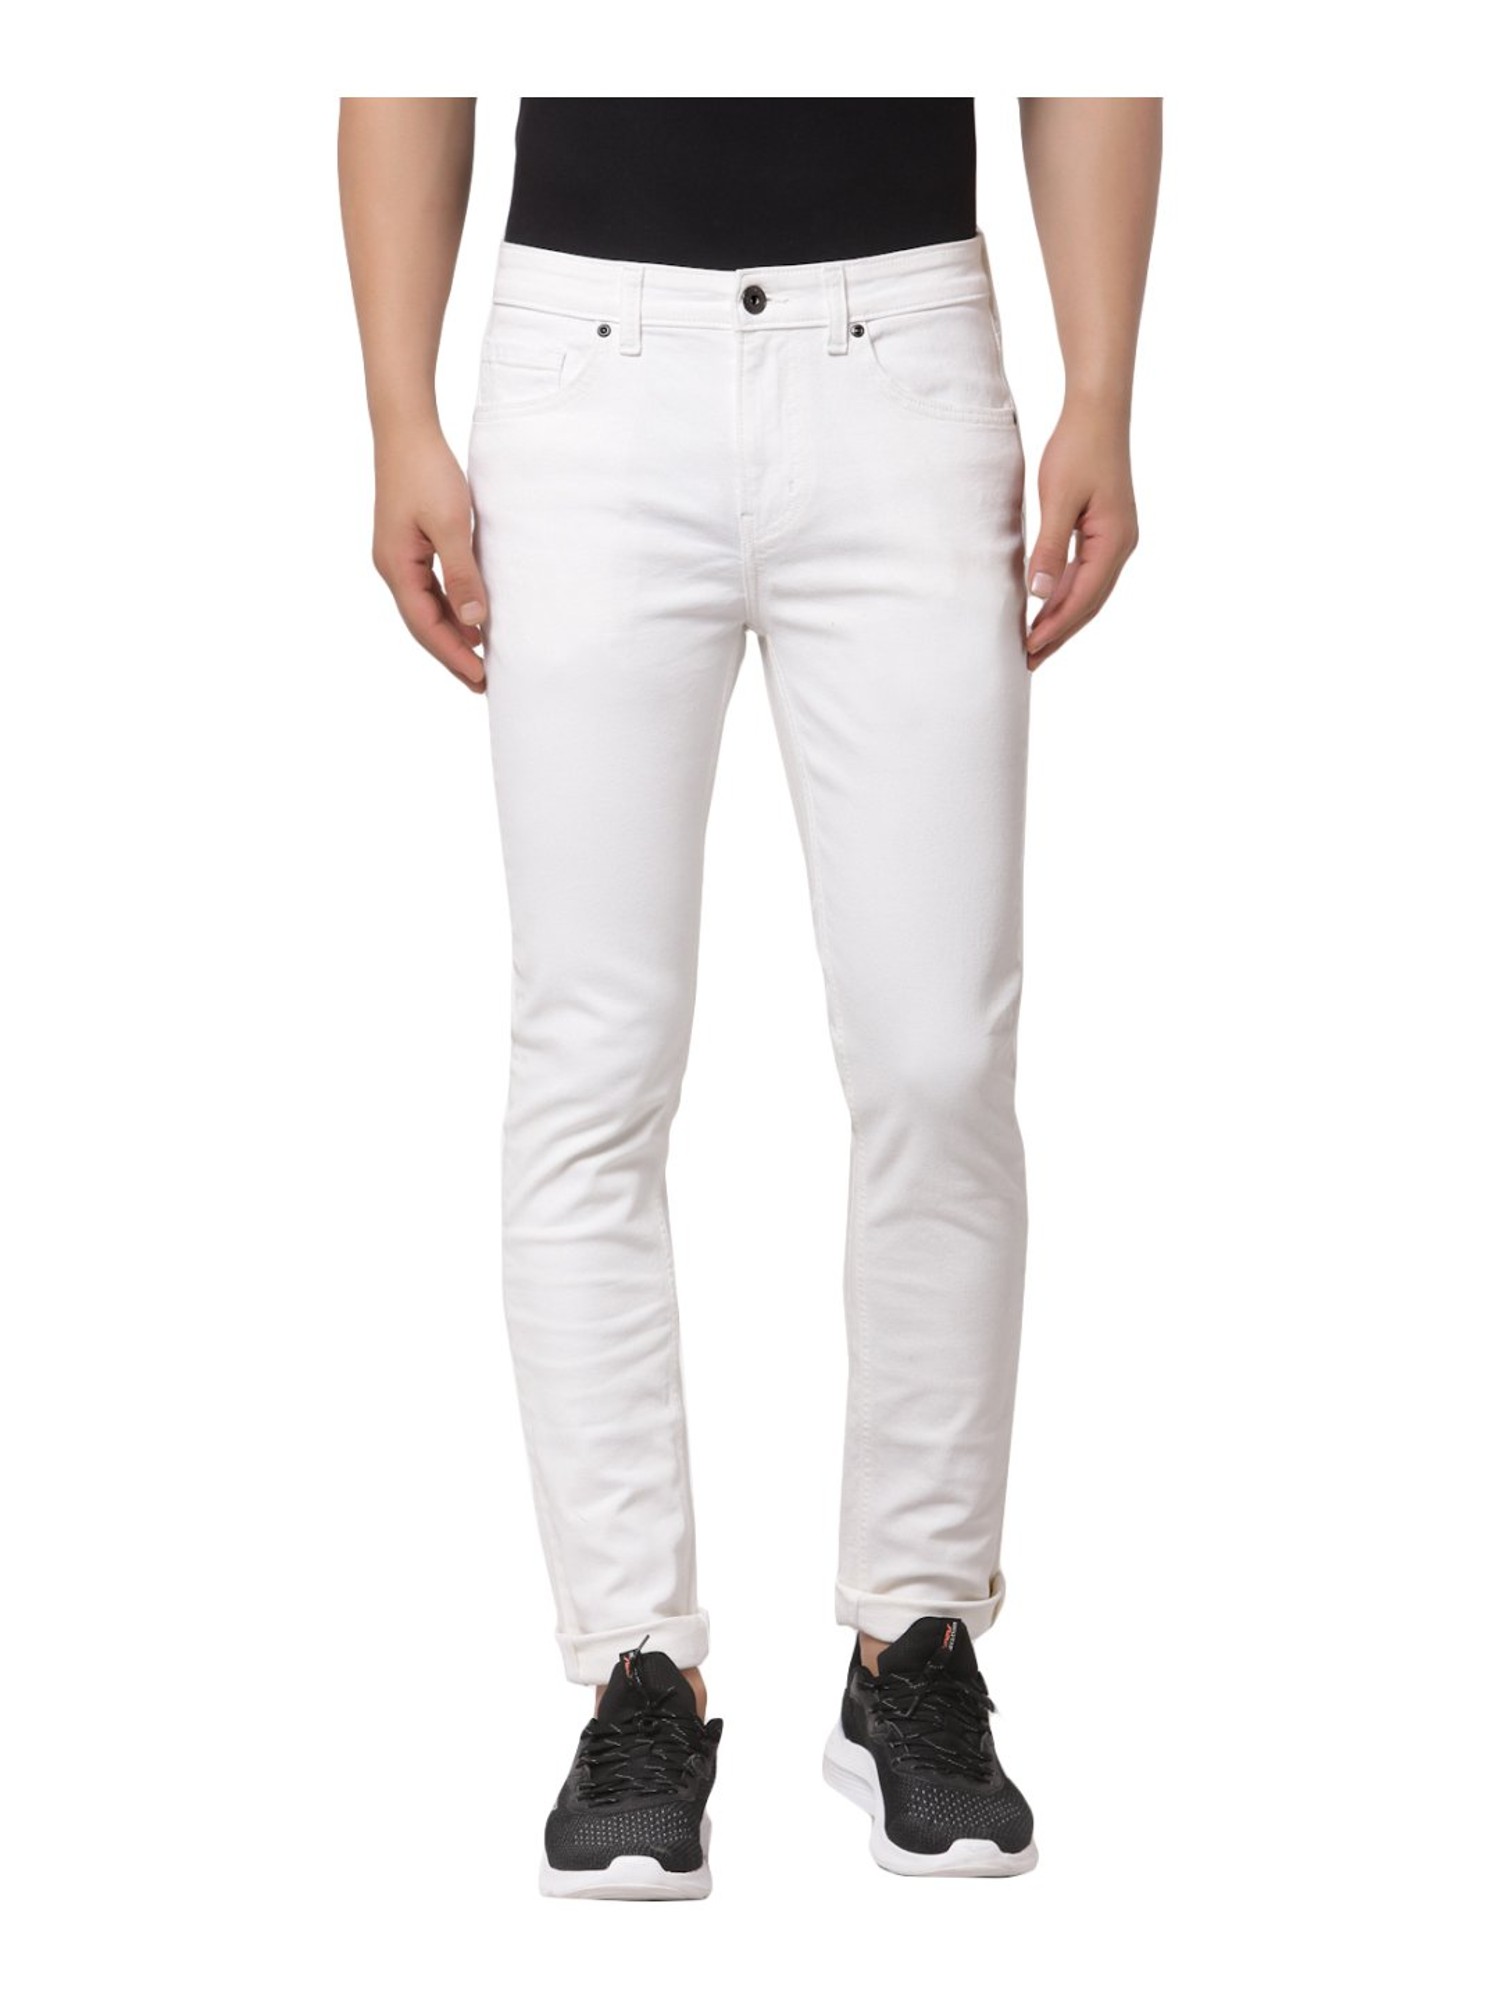 South Shores White Men's Summer Jeans - Comfortable Jeans by Mugsy